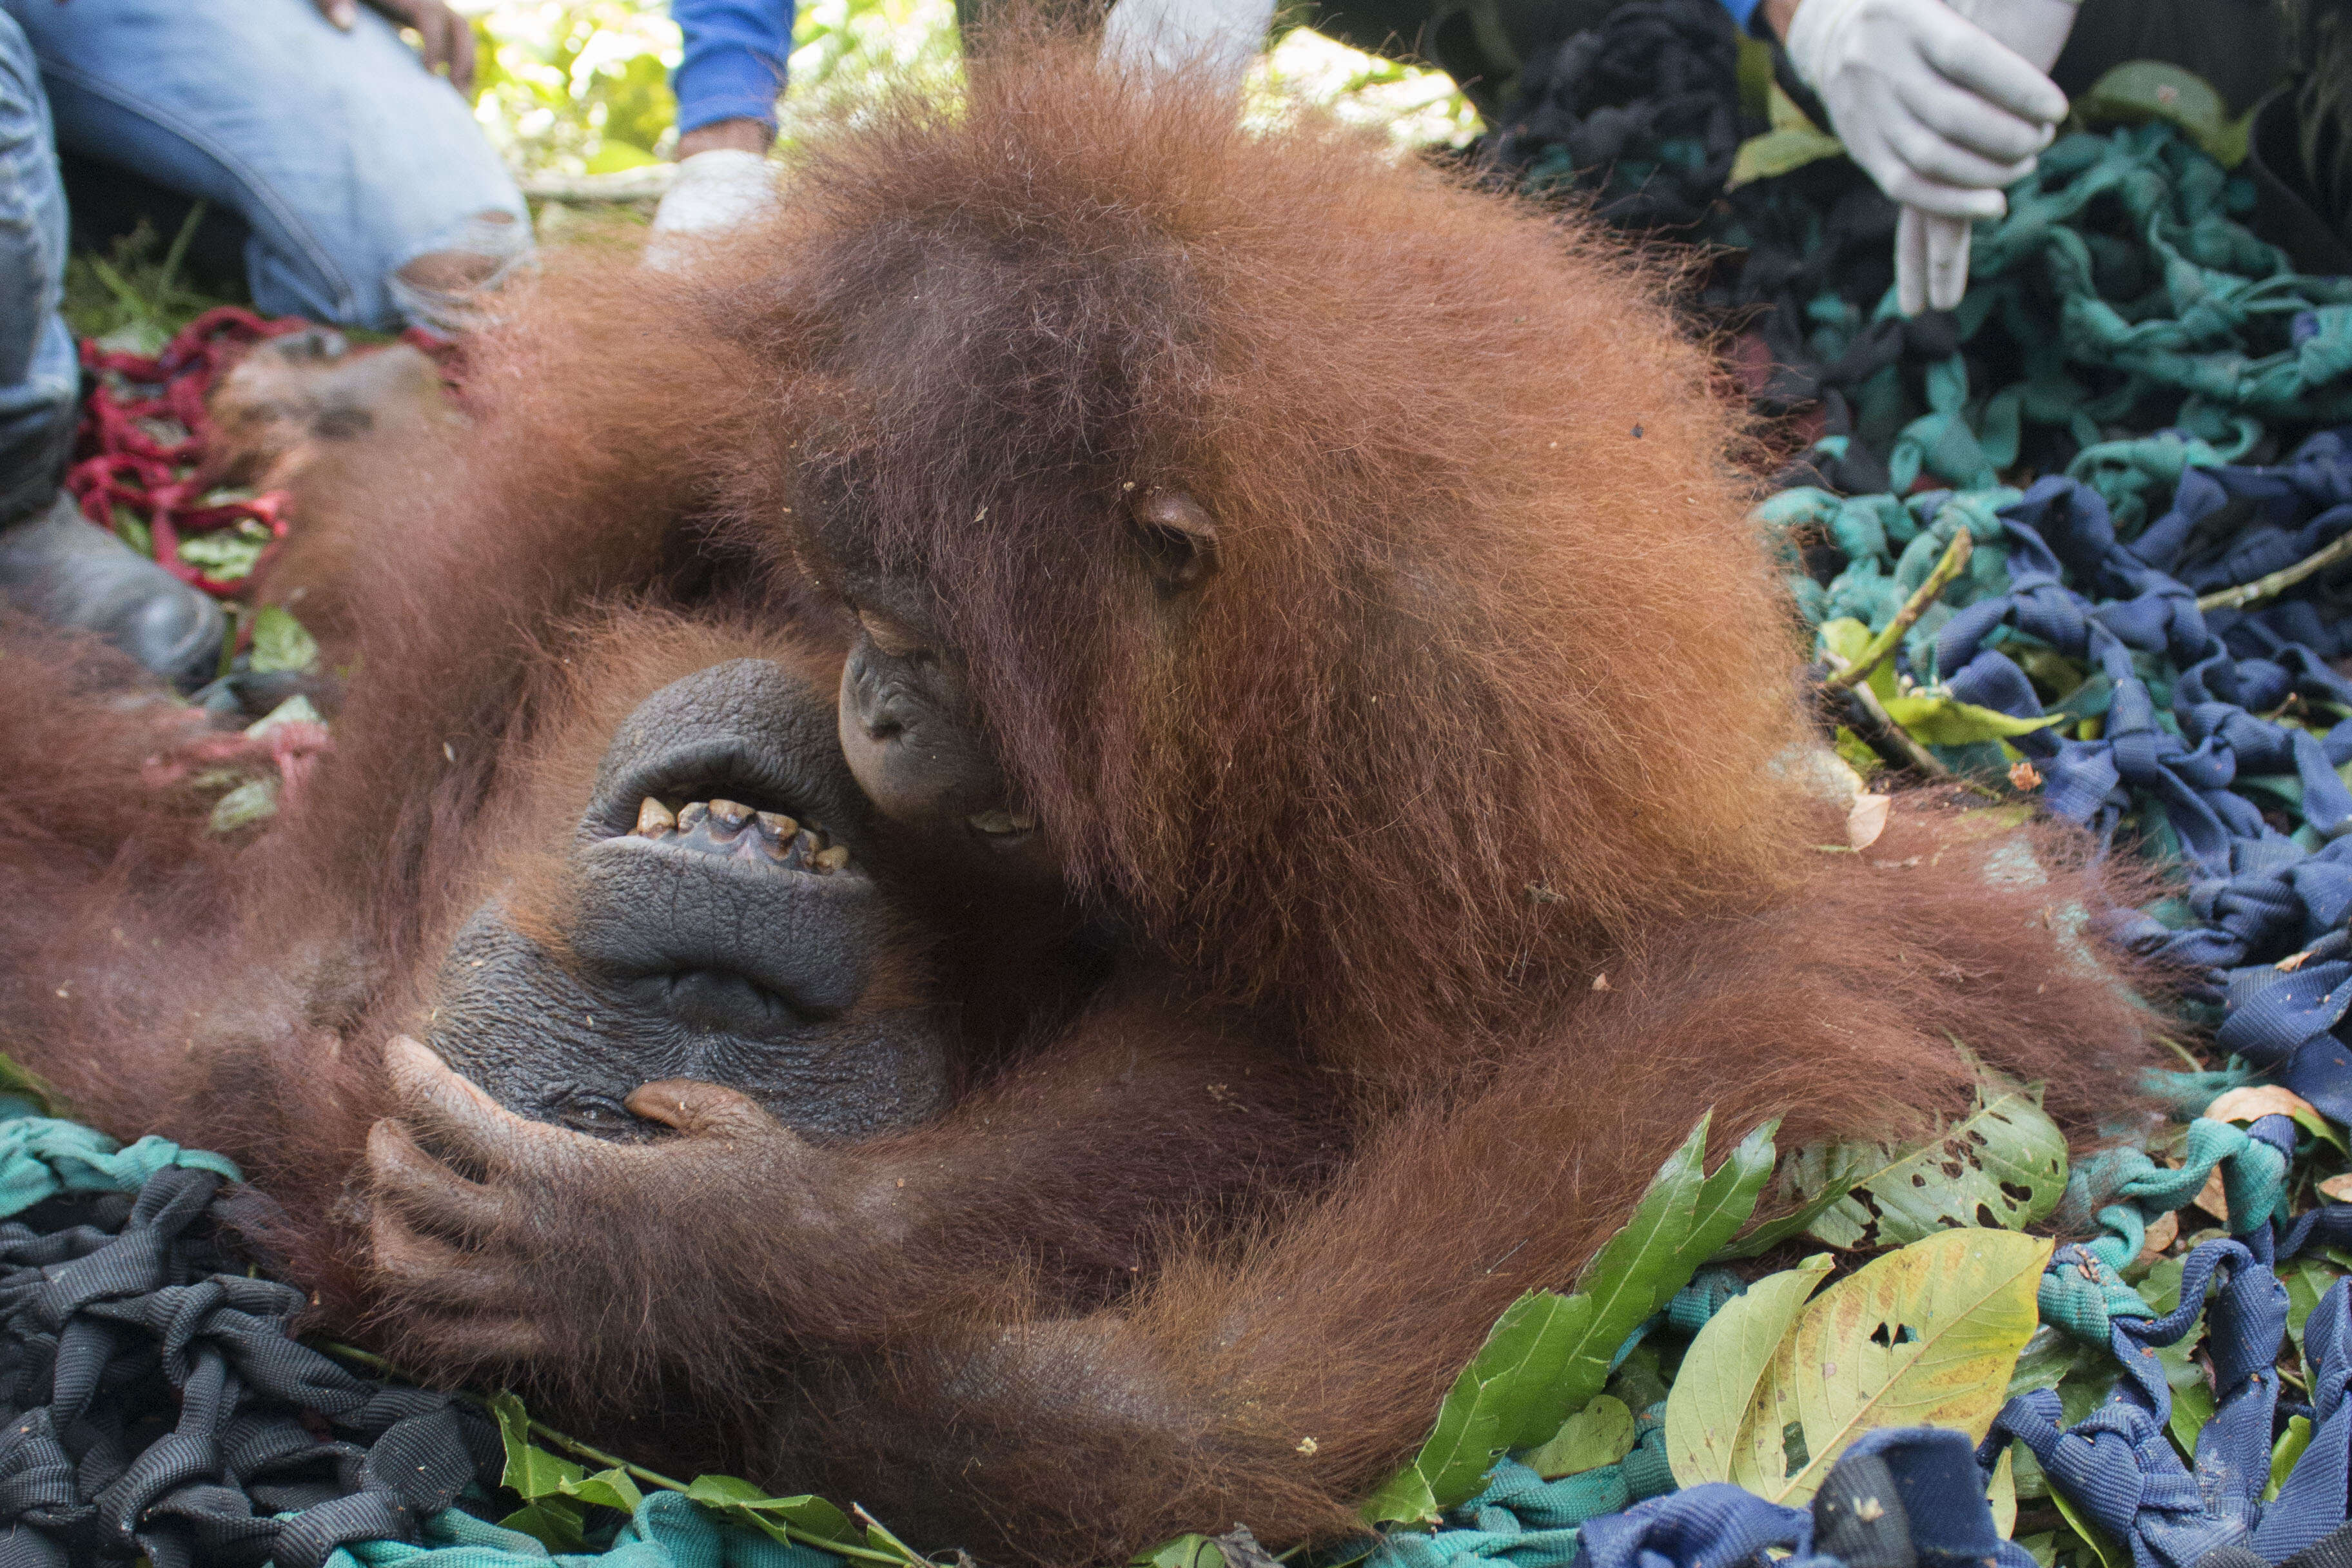 Mother orangutan and baby on the ground